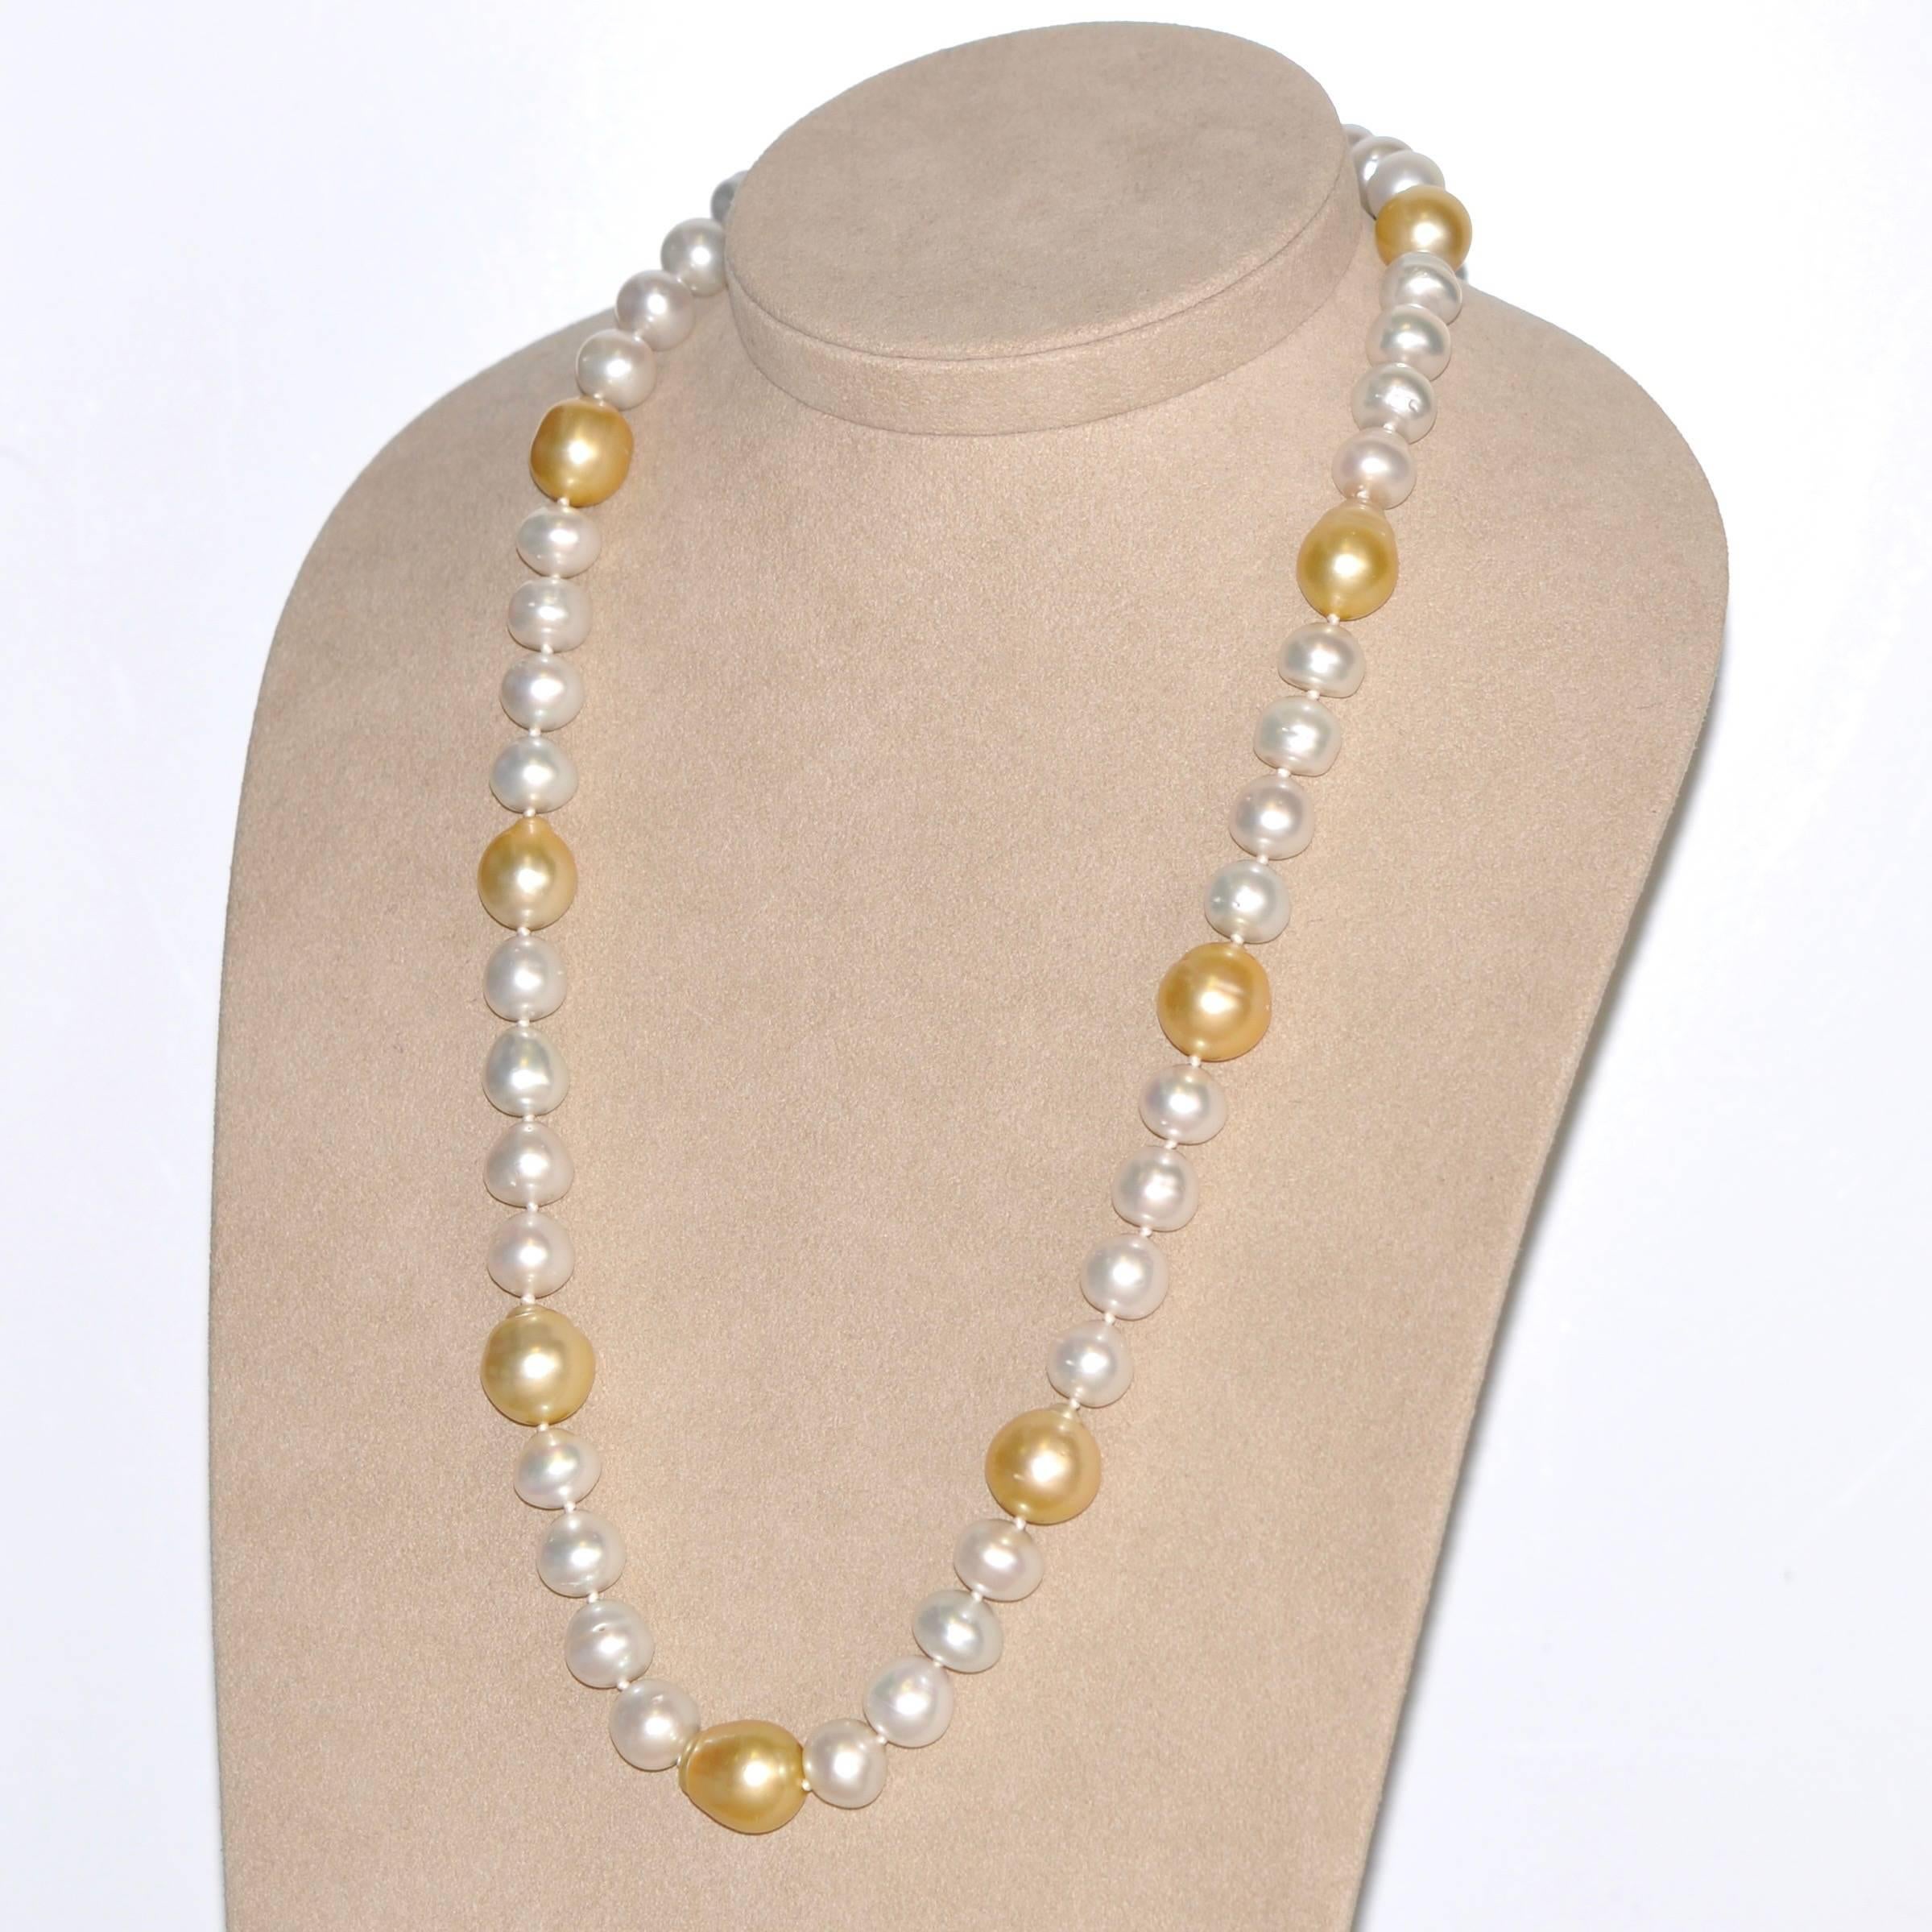 Discover this South Sea White and Gold 50 Pearls Beaded Necklace.
40 South Sea White
10 White Gold Pearls